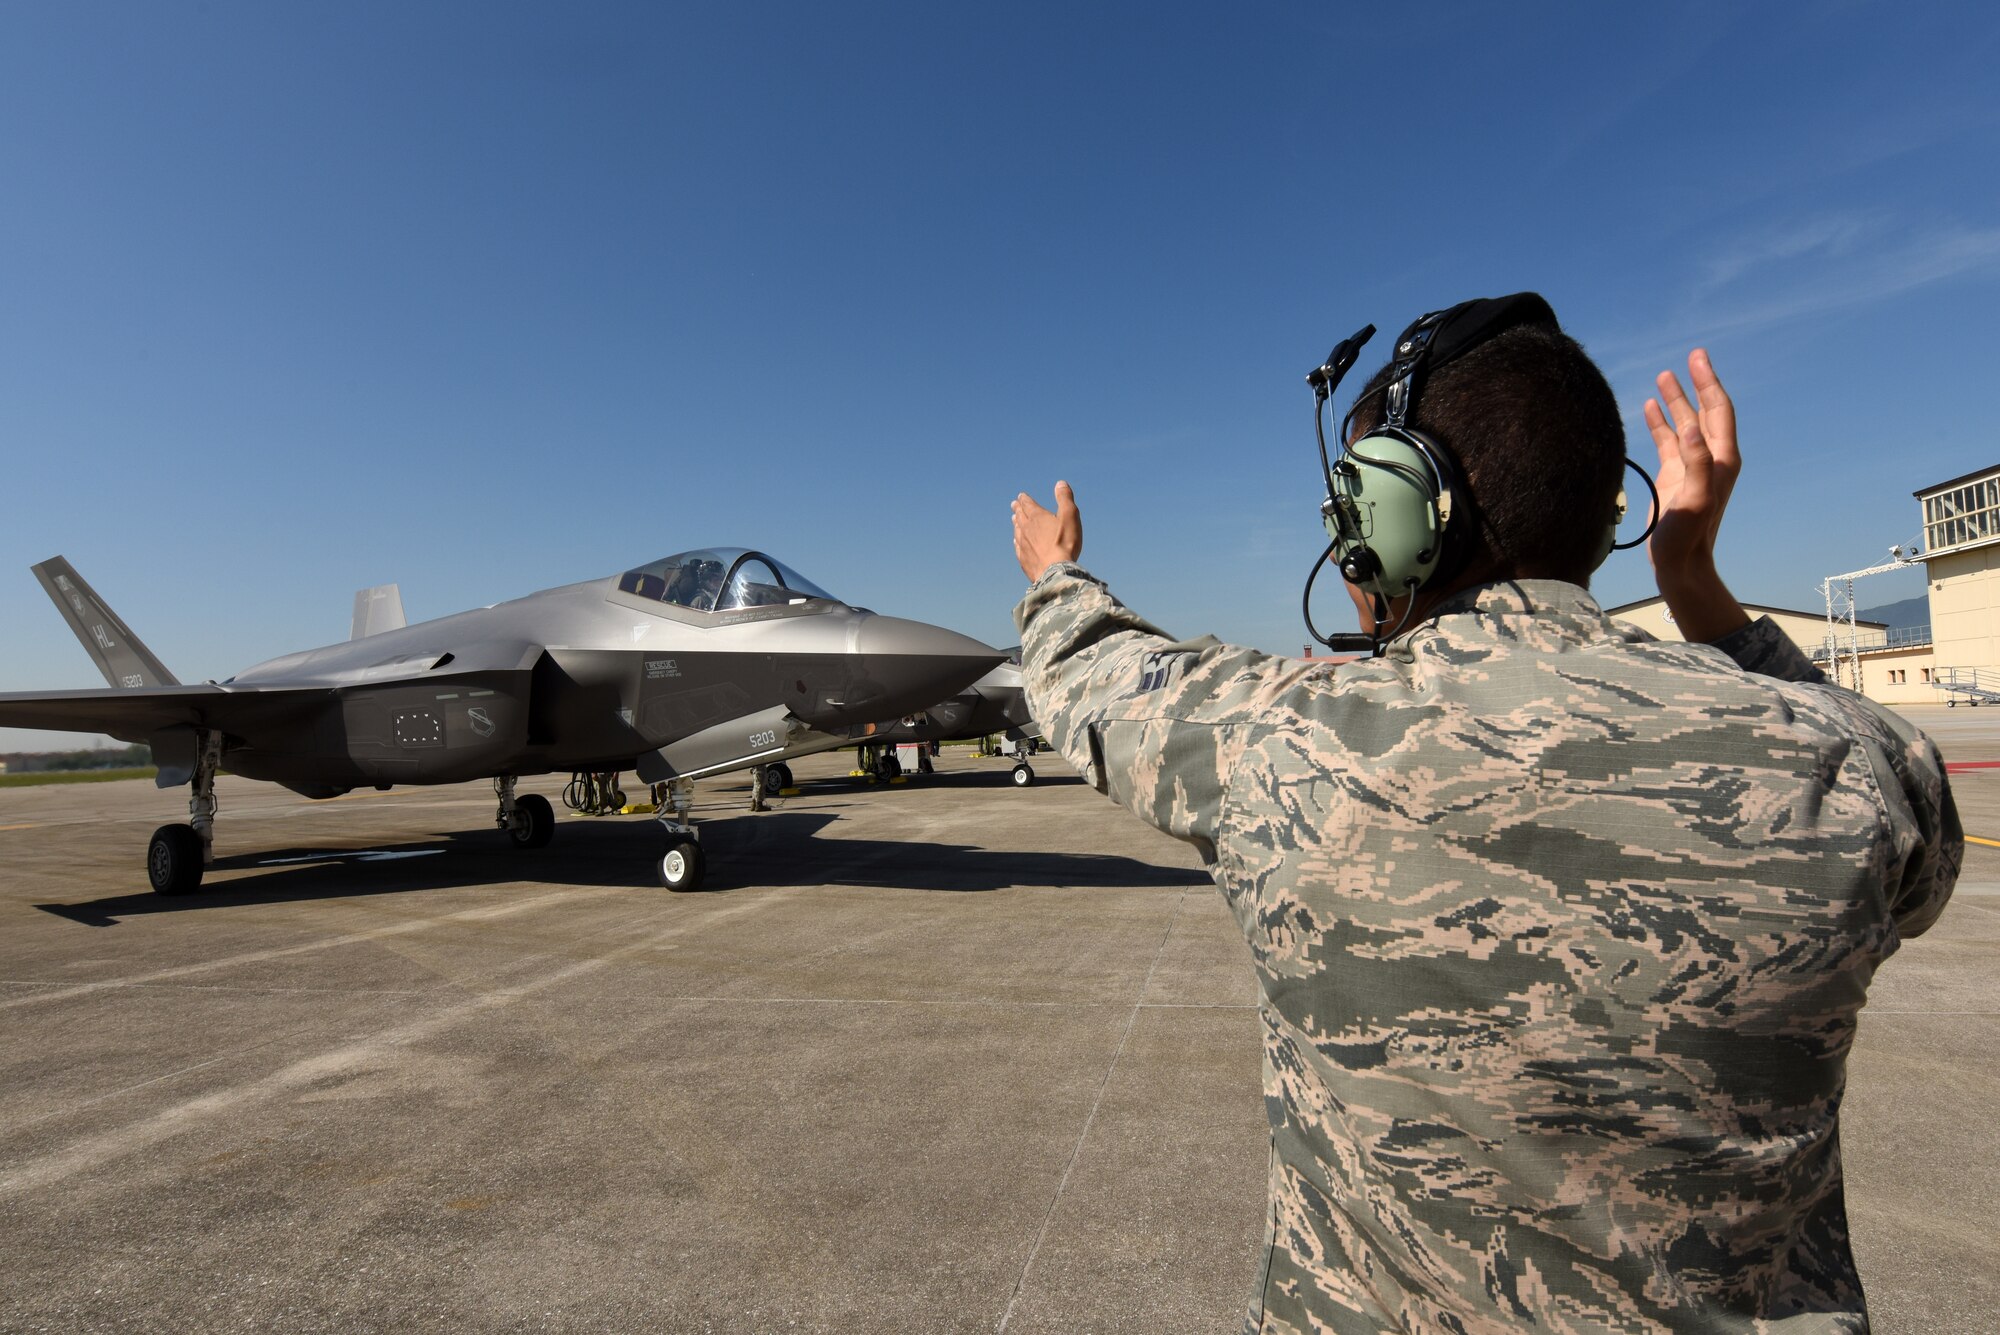 Airman 1st Class Zachary Stiles, 421st Aircraft Maintenance Unit BOLT mission systems technician, taxis an F-35A Lightning II fighter jet May 31, 2019, at Aviano Air Base. Airmen from the 388th and 419th Fighter Wings at Hill Air Force Base, Utah, are in Europe as part of a Theater Security Package. Currently they are participating in Astral Knight 2019, a joint and multinational exercise that involves airmen, soldiers and sailors from the United States and airmen from Croatia, Italy, and Slovenia. The exercise is an integrated air and missile defense exercise focused on conducting integrated defense of key terrain. (U.S. Air Force photo by Tech. Sgt. Jim Araos) (U.S. Air Force photo by Tech. Sgt. Jim Araos)